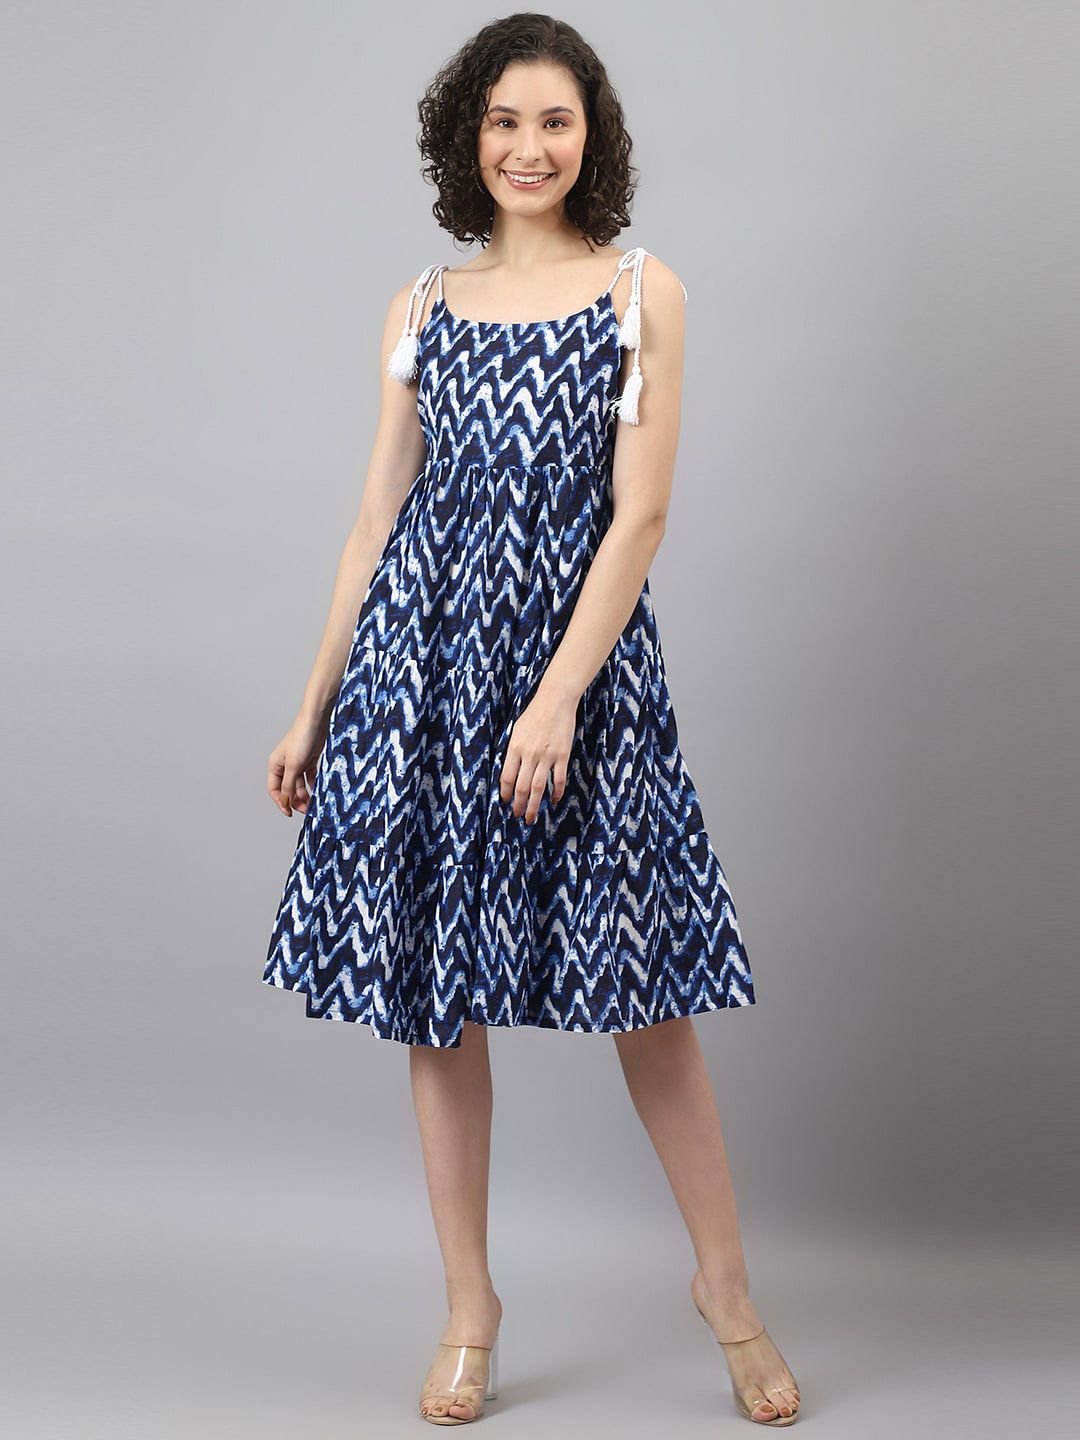 DEEBACO Navy Blue & White Chevron Printed Fit & Flare Cotton Dress Price in India